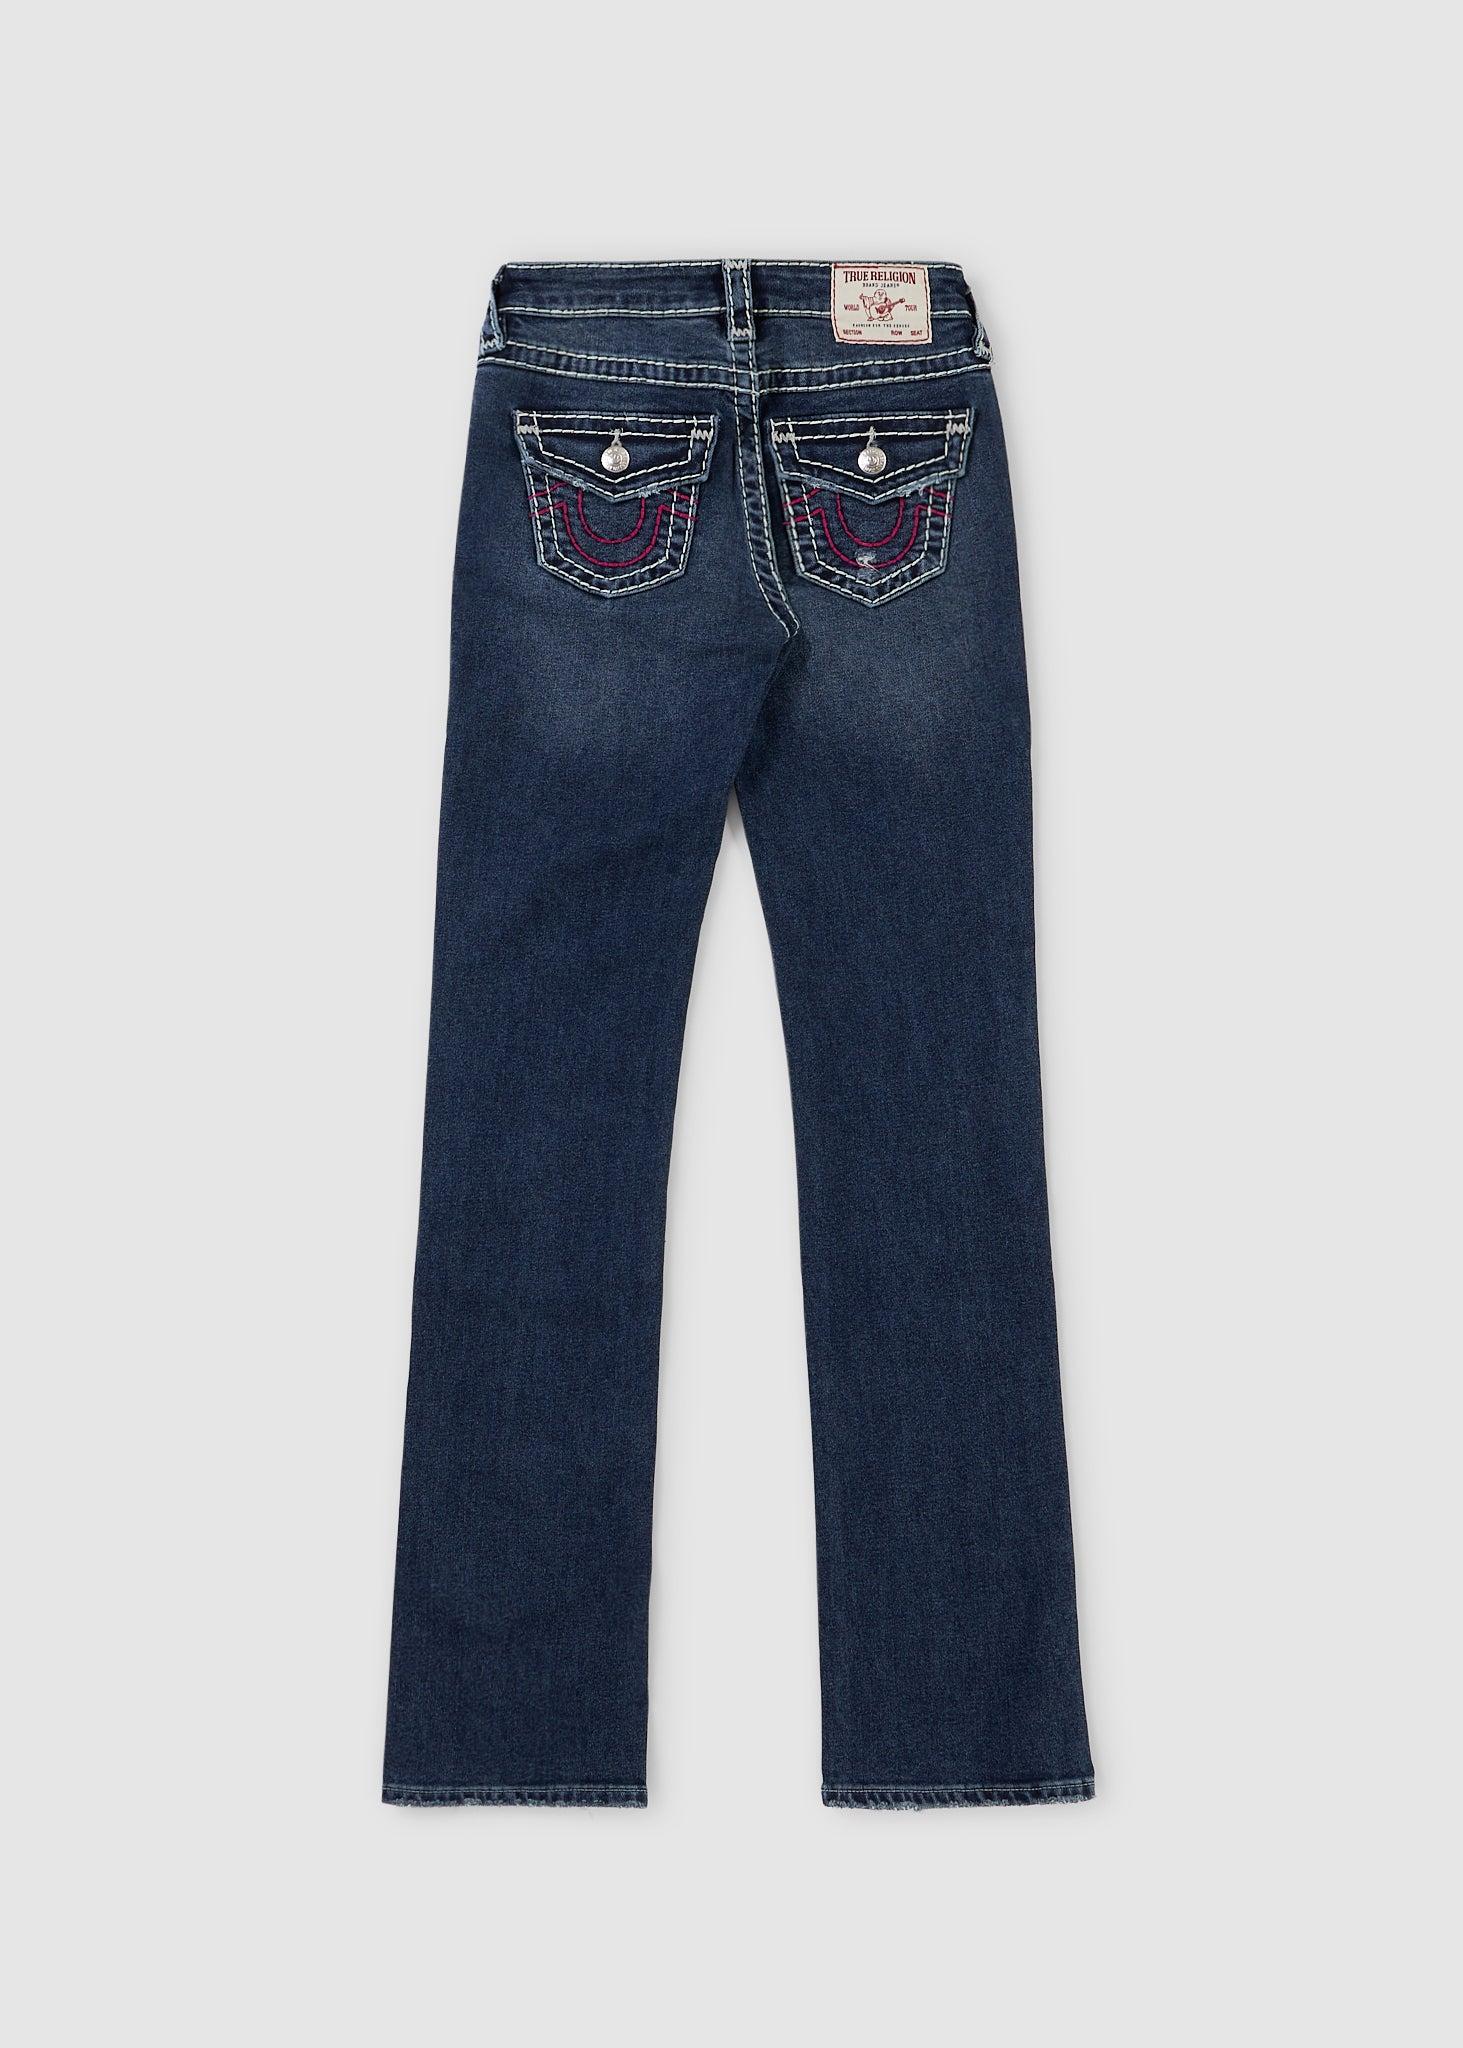 True Religion Billie Super T Jeans With Pocket Flap in Blue | Lyst